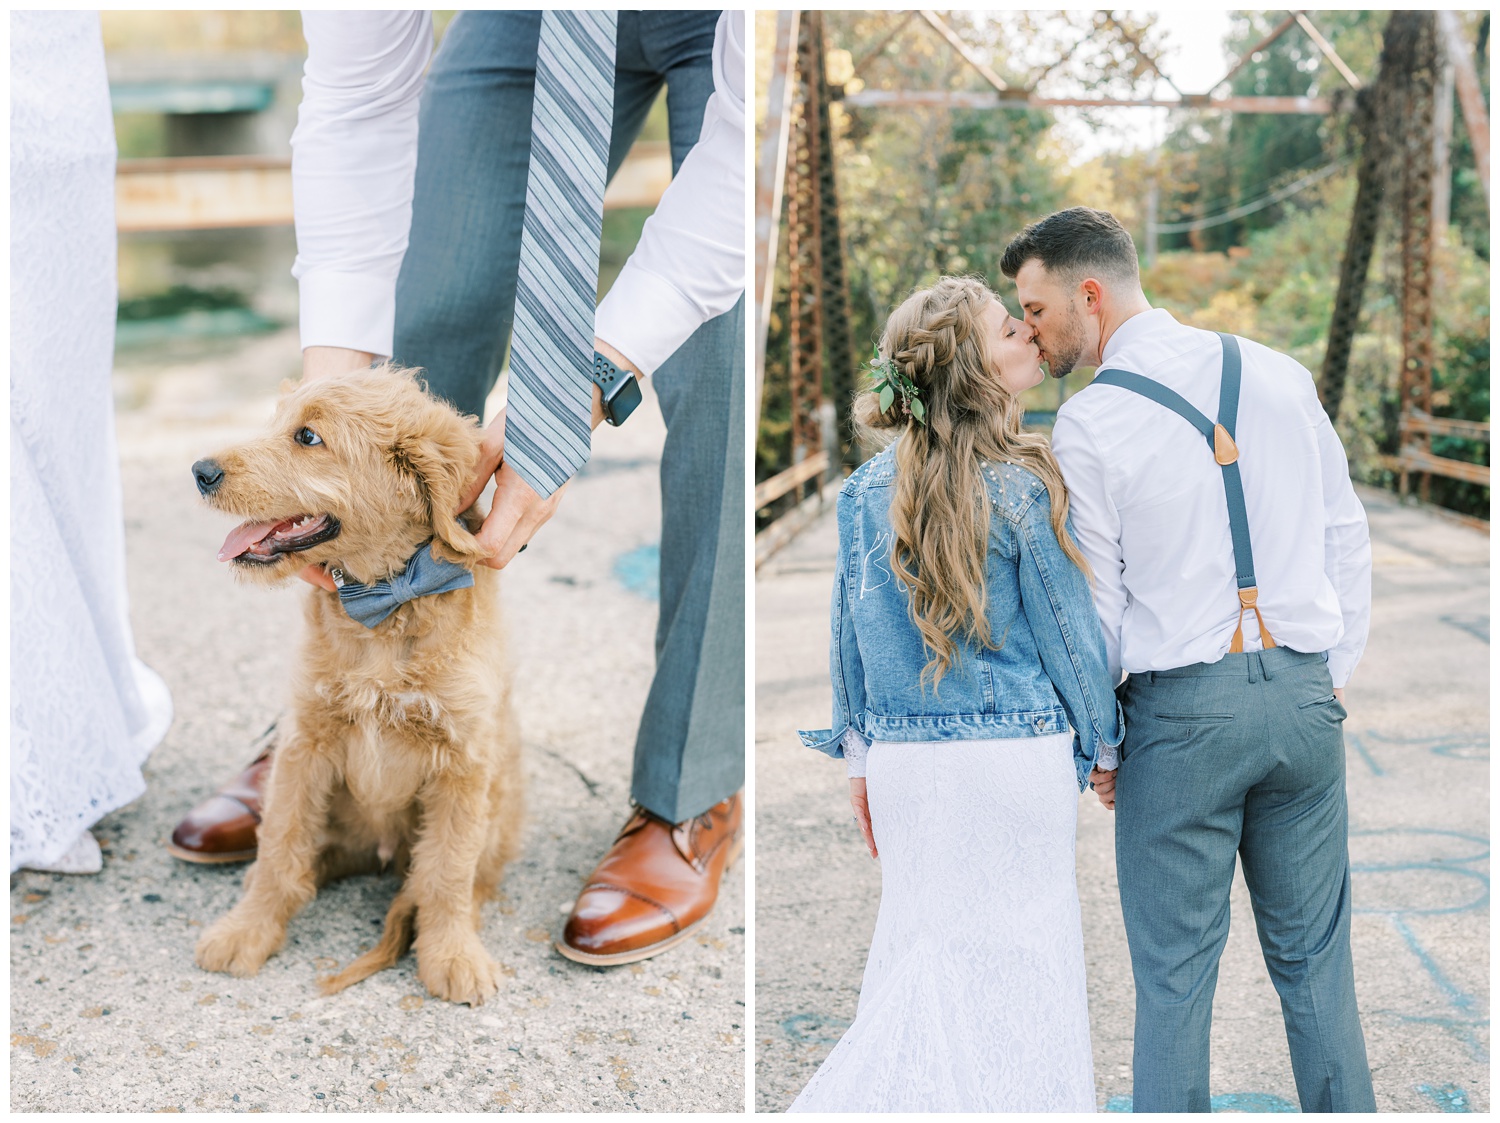 Bride and groom with puppy at Illinois wedding